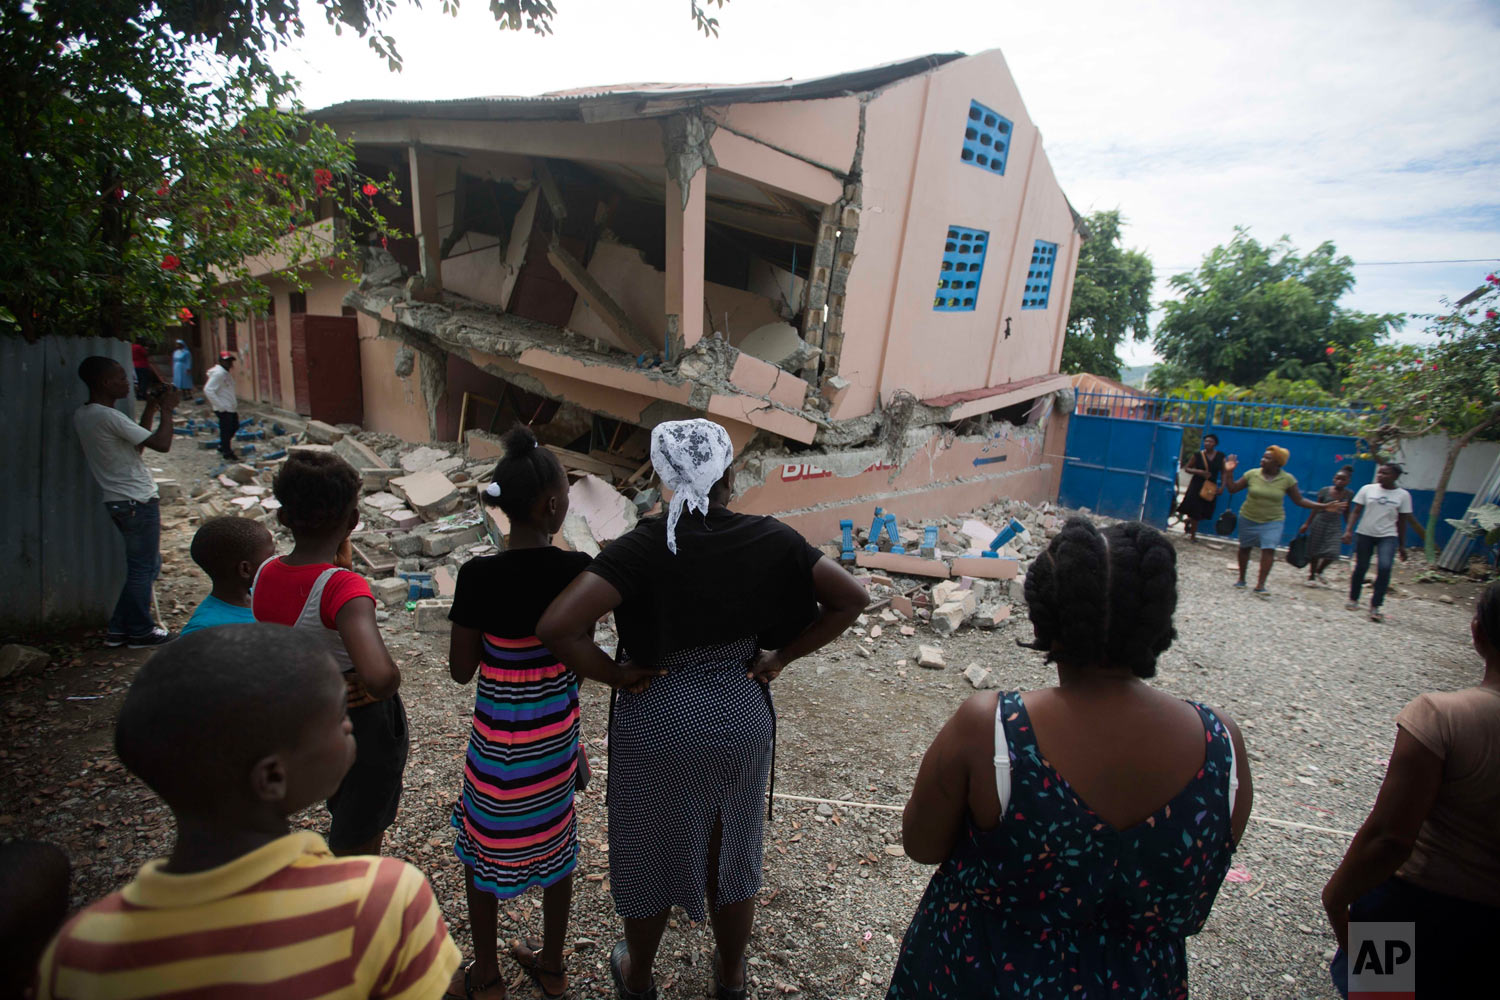  Residents look at a collapsed school after a magnitude 5.9 earthquake hit the night before in Gros Morne, Haiti, Oct. 7, 2018. The quake killed at least 11 people and left dozens injured. (AP Photo/Dieu Nalio Chery) 